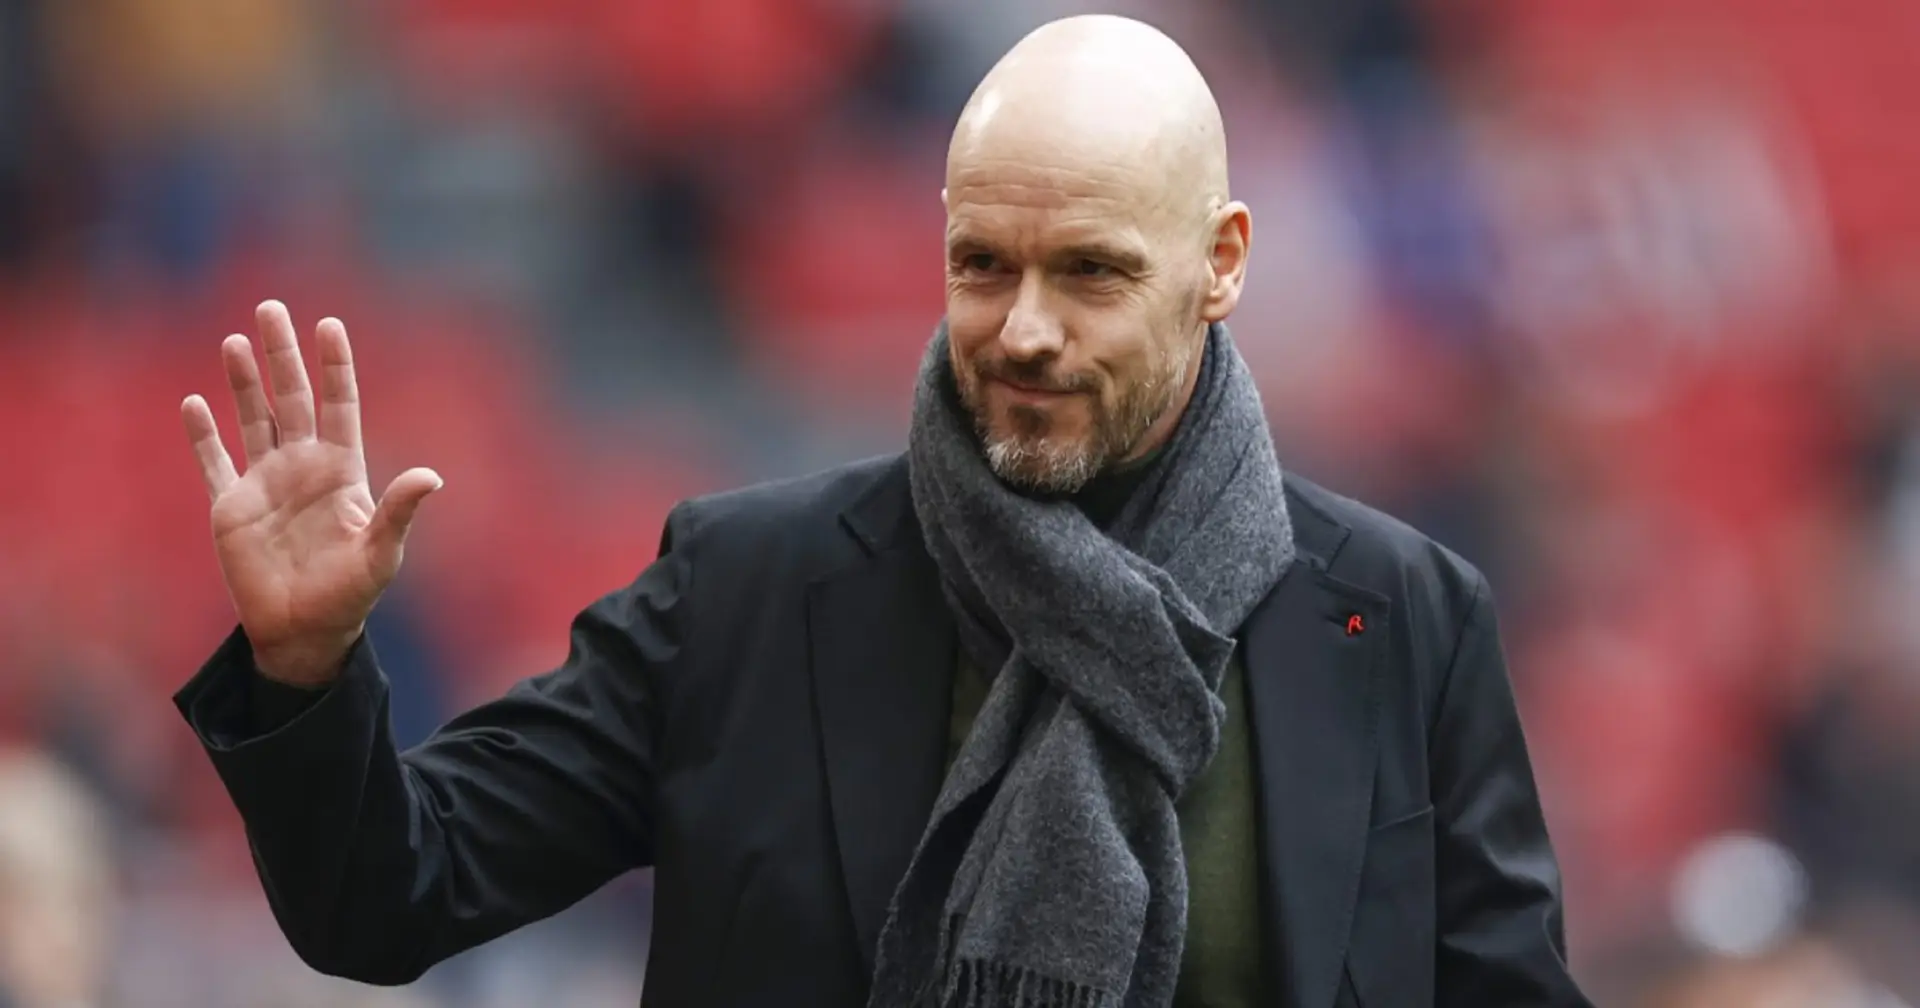 Announcement in 'hours', £250m war chest & more: Latest on Ten Hag to Man United